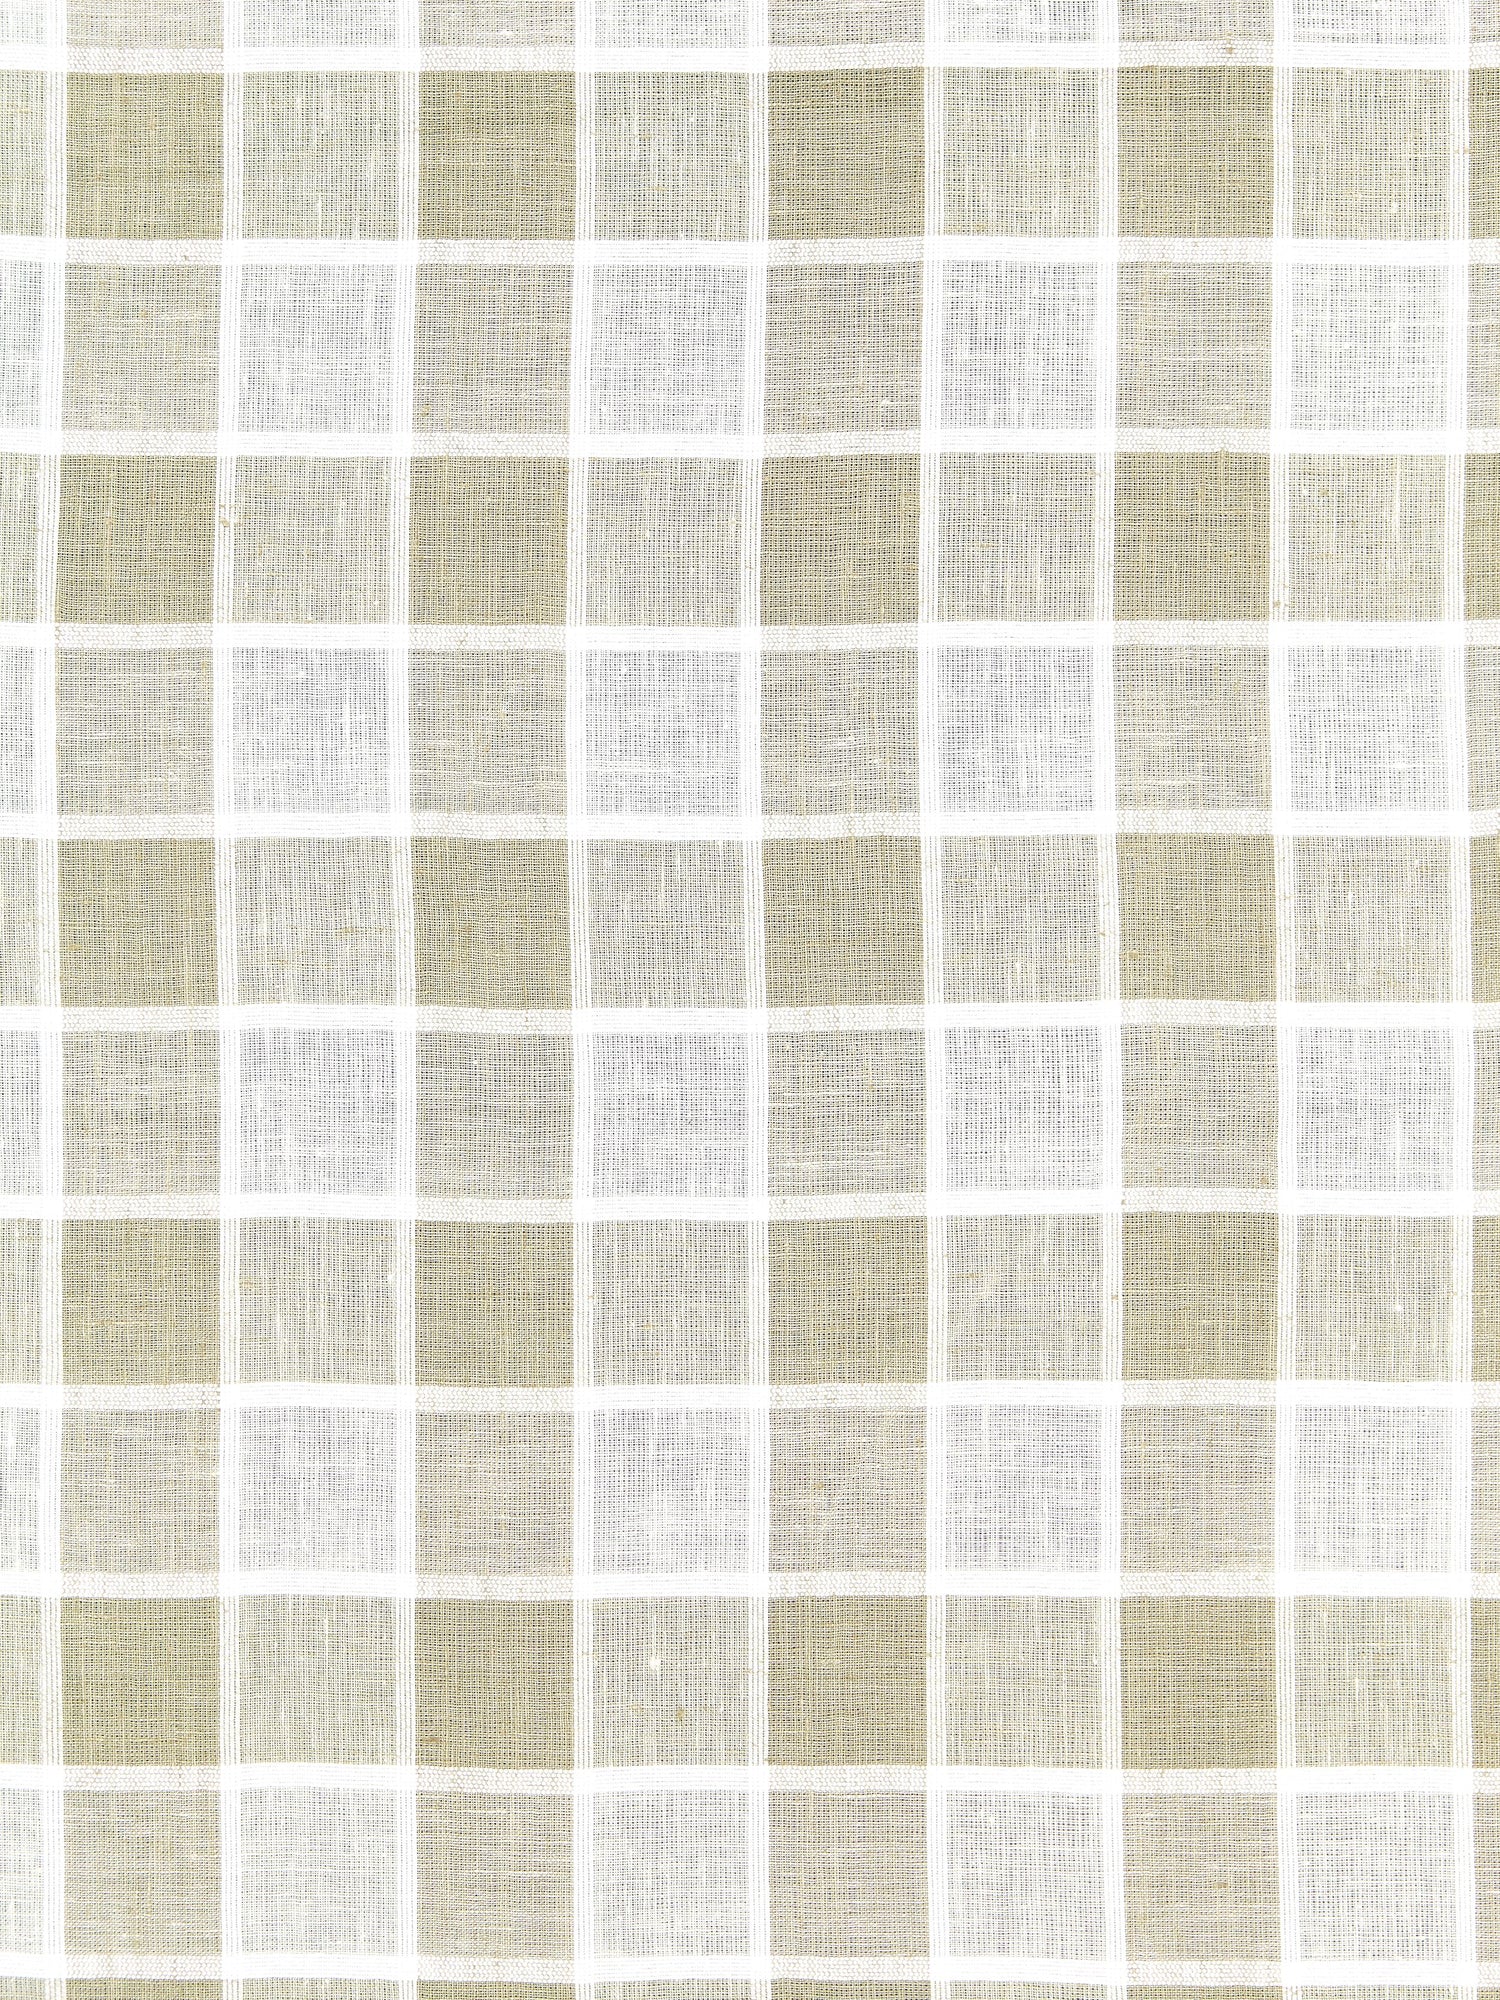 Wainscott Check Sheer fabric in linen color - pattern number SC 000127043 - by Scalamandre in the Scalamandre Fabrics Book 1 collection